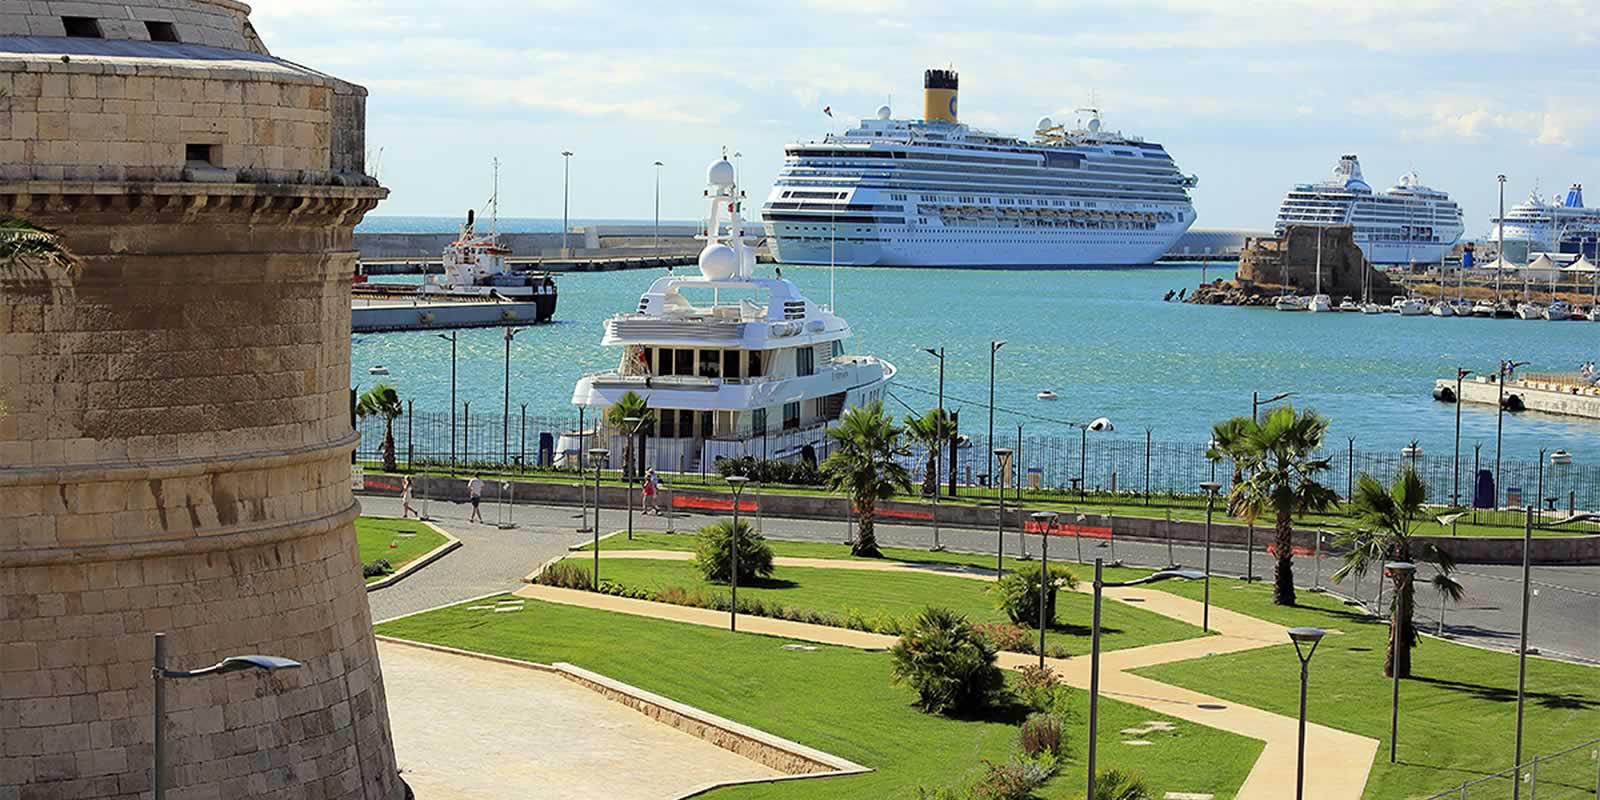 How to get Civitavecchia Port from Rome and from Airport ...